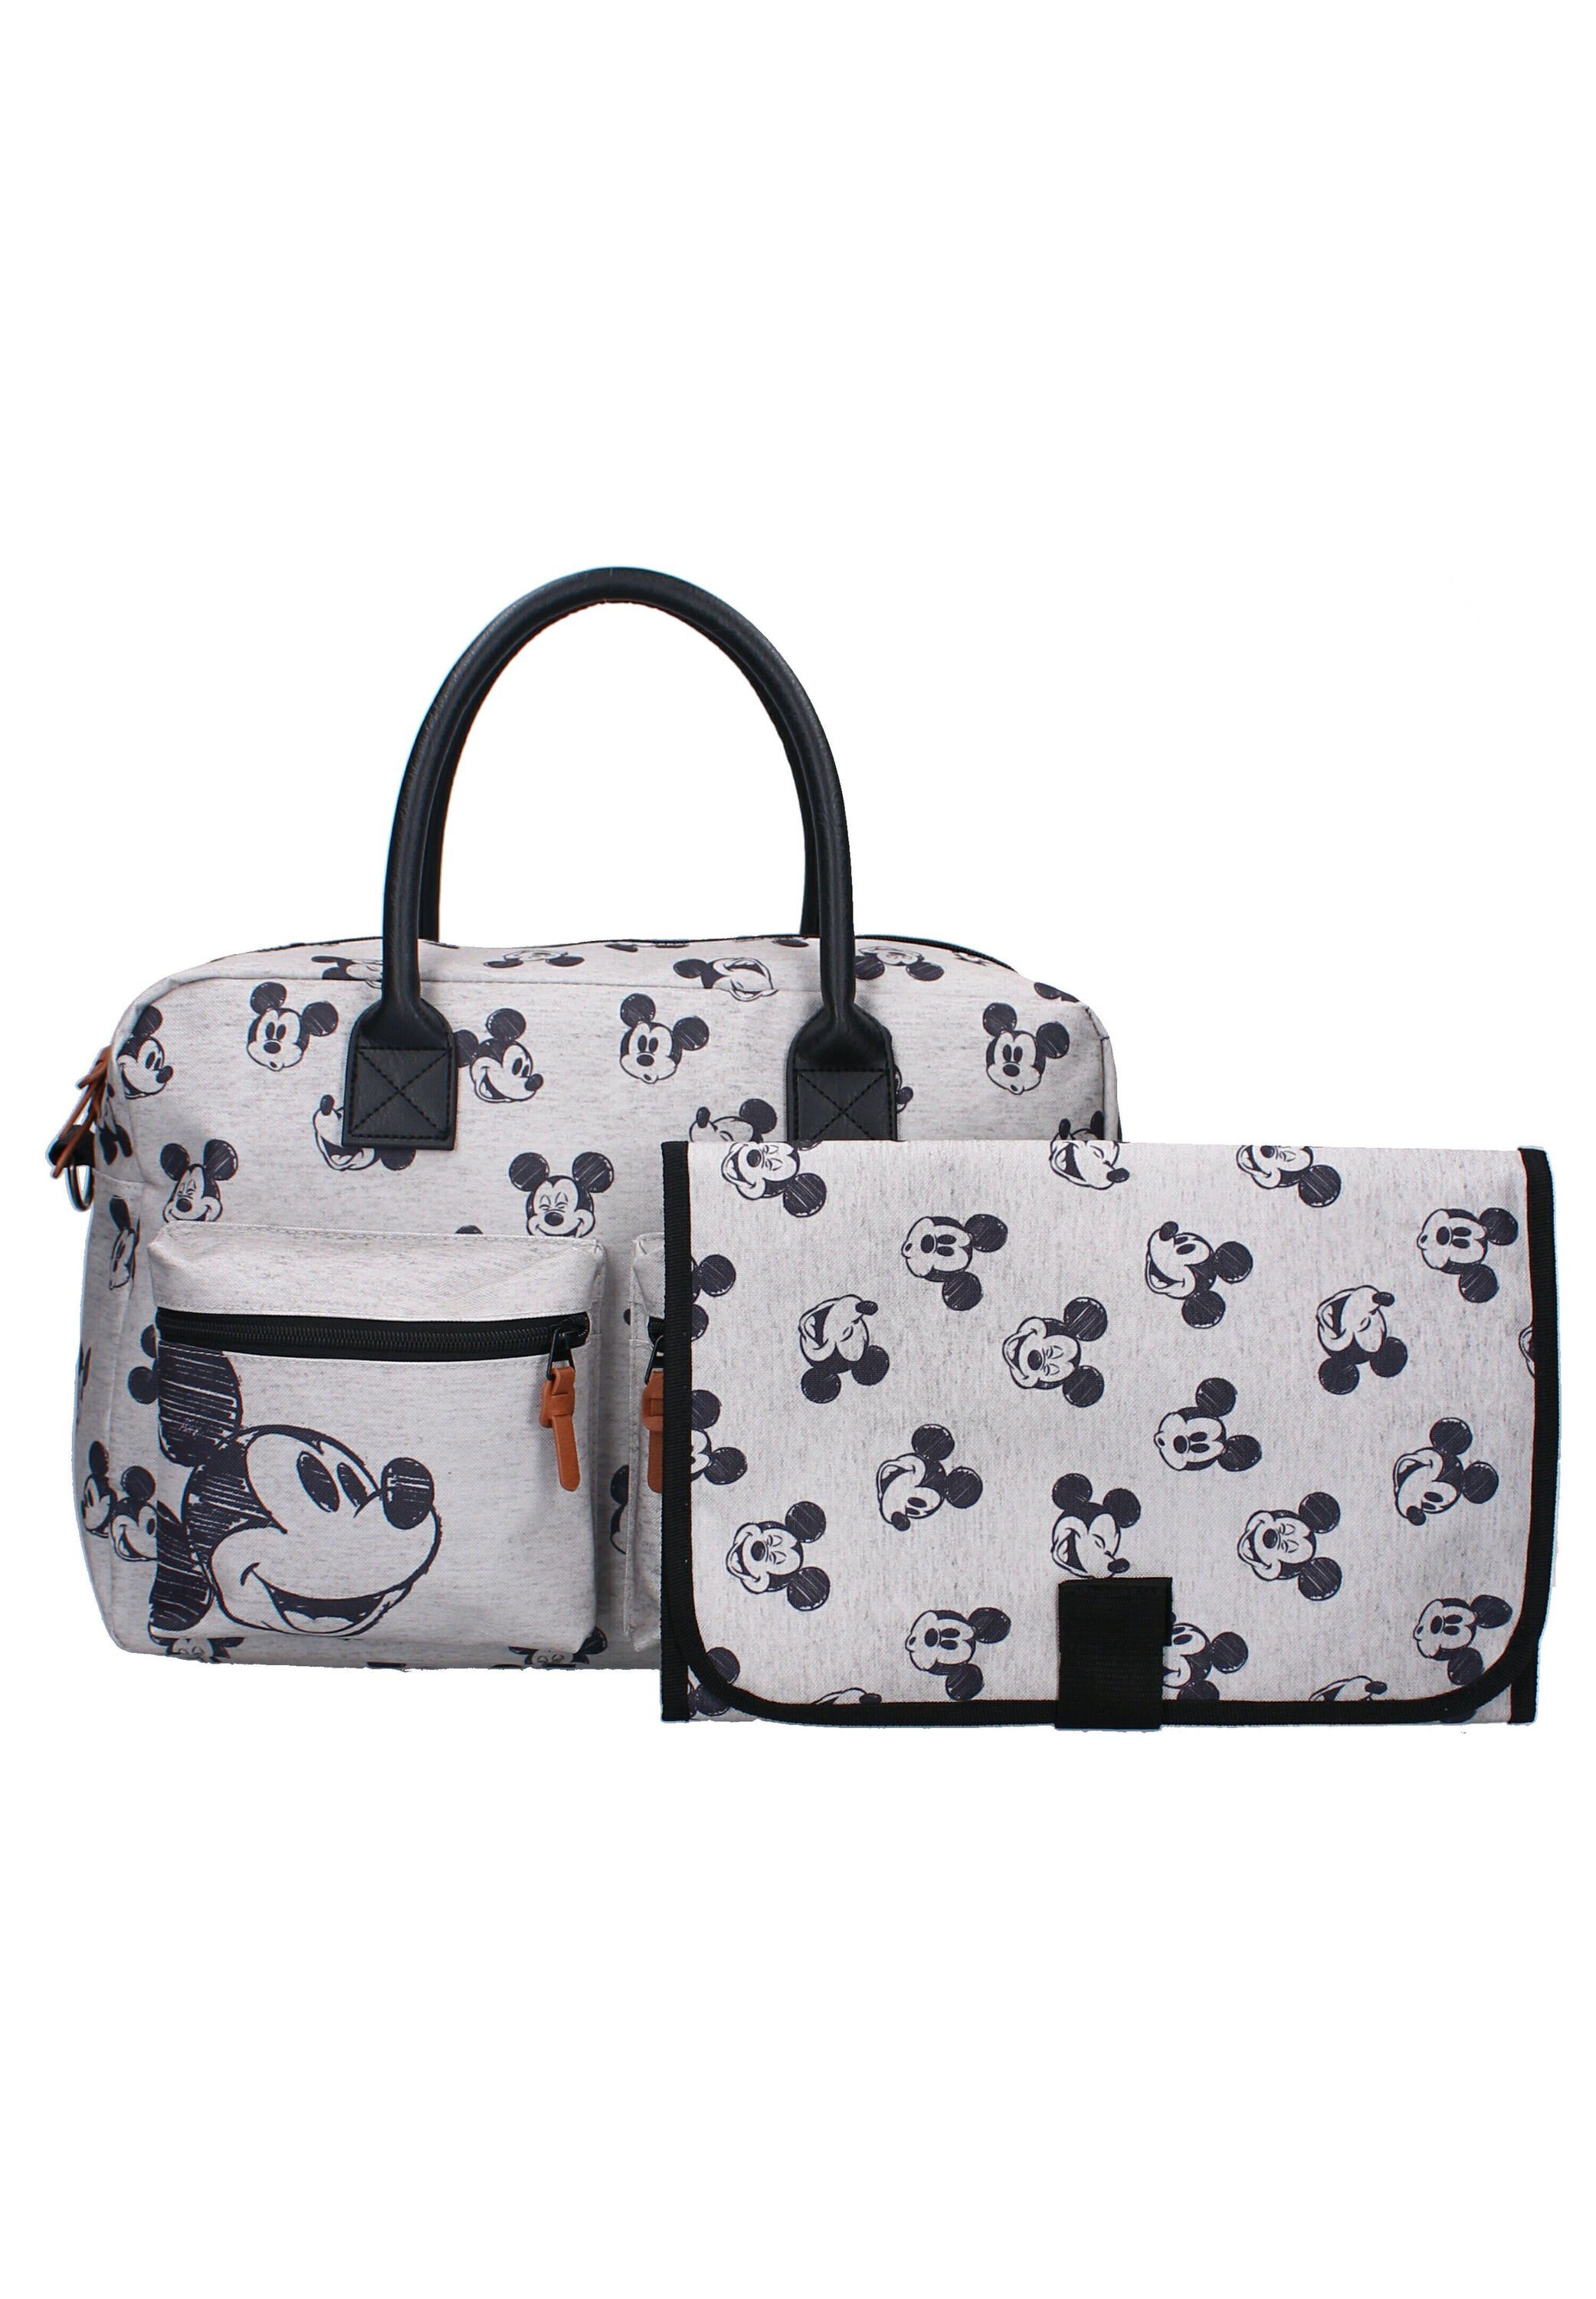 Vadobag Mickey Mouse Better care Wickeltasche